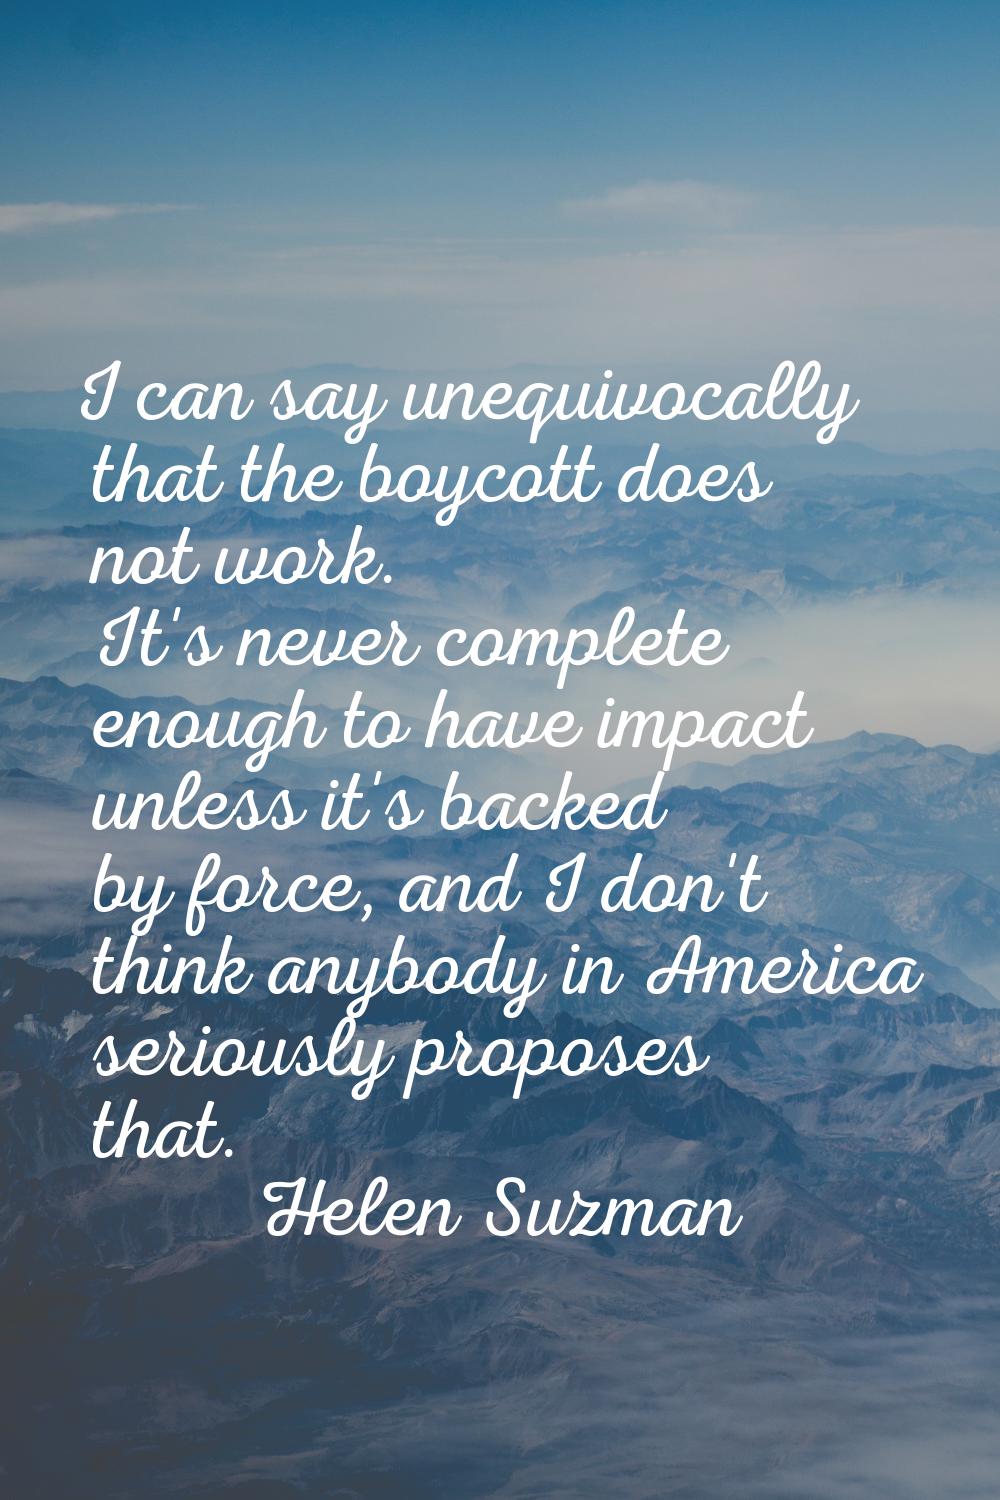 I can say unequivocally that the boycott does not work. It's never complete enough to have impact u